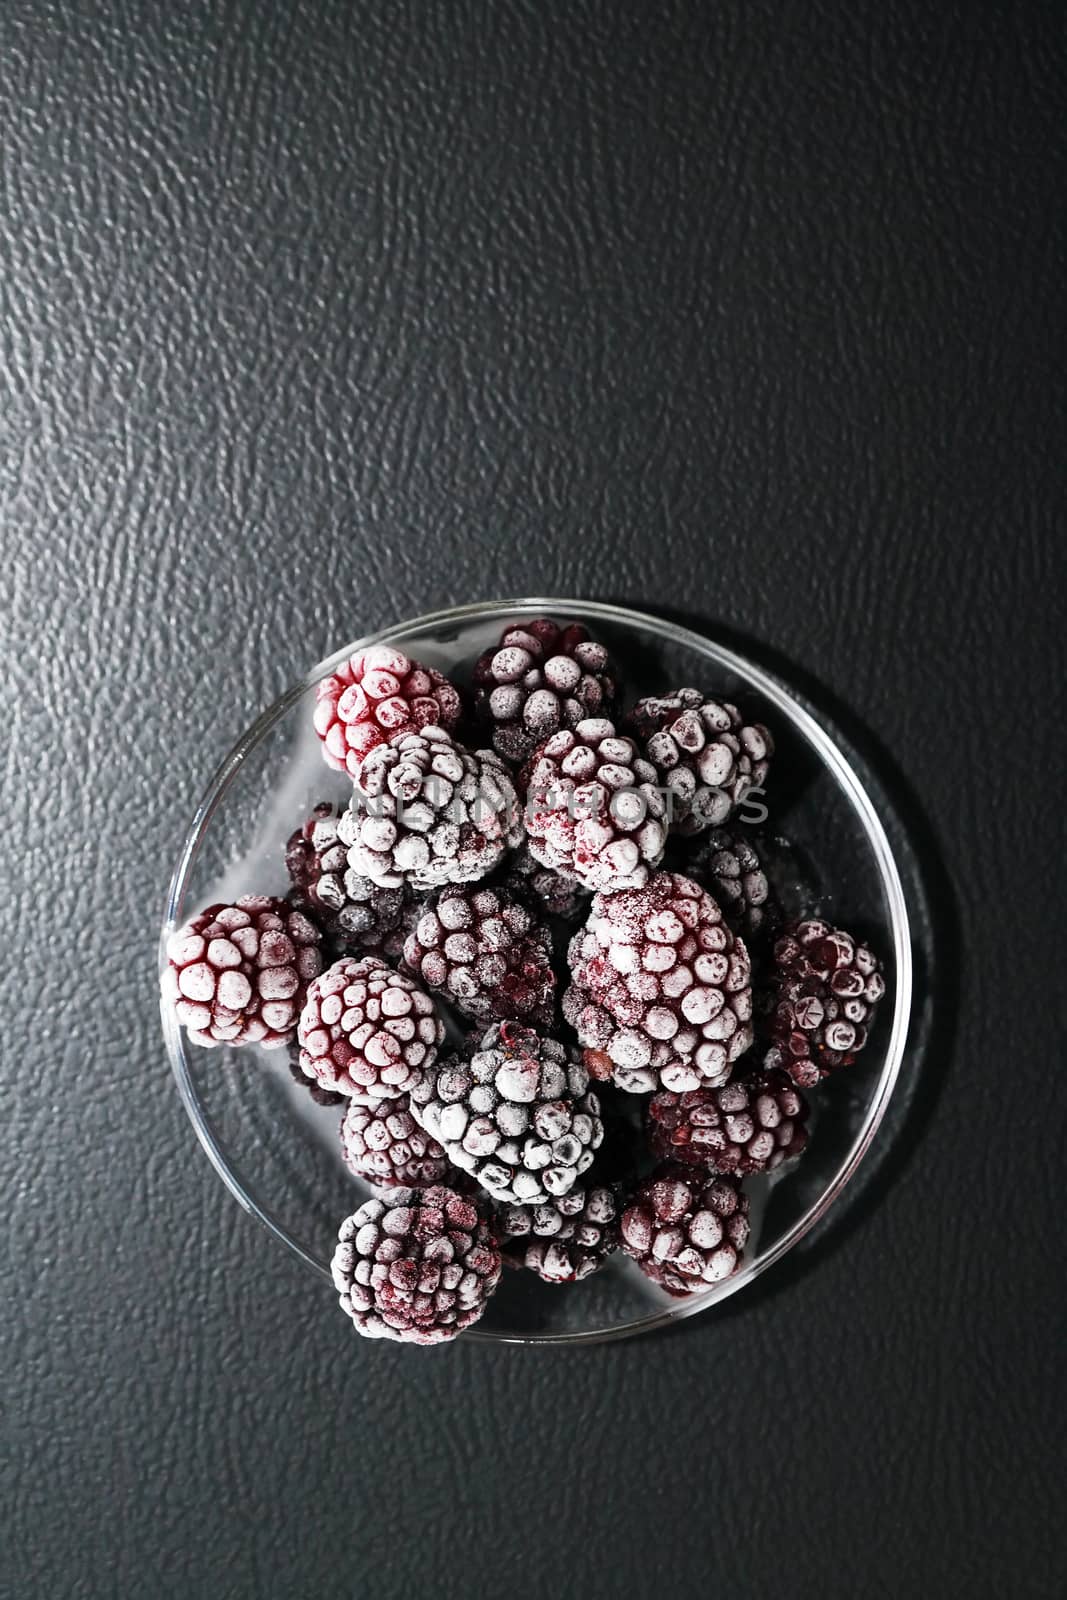 Saucer with heap of frozen black berry fruits on dark background